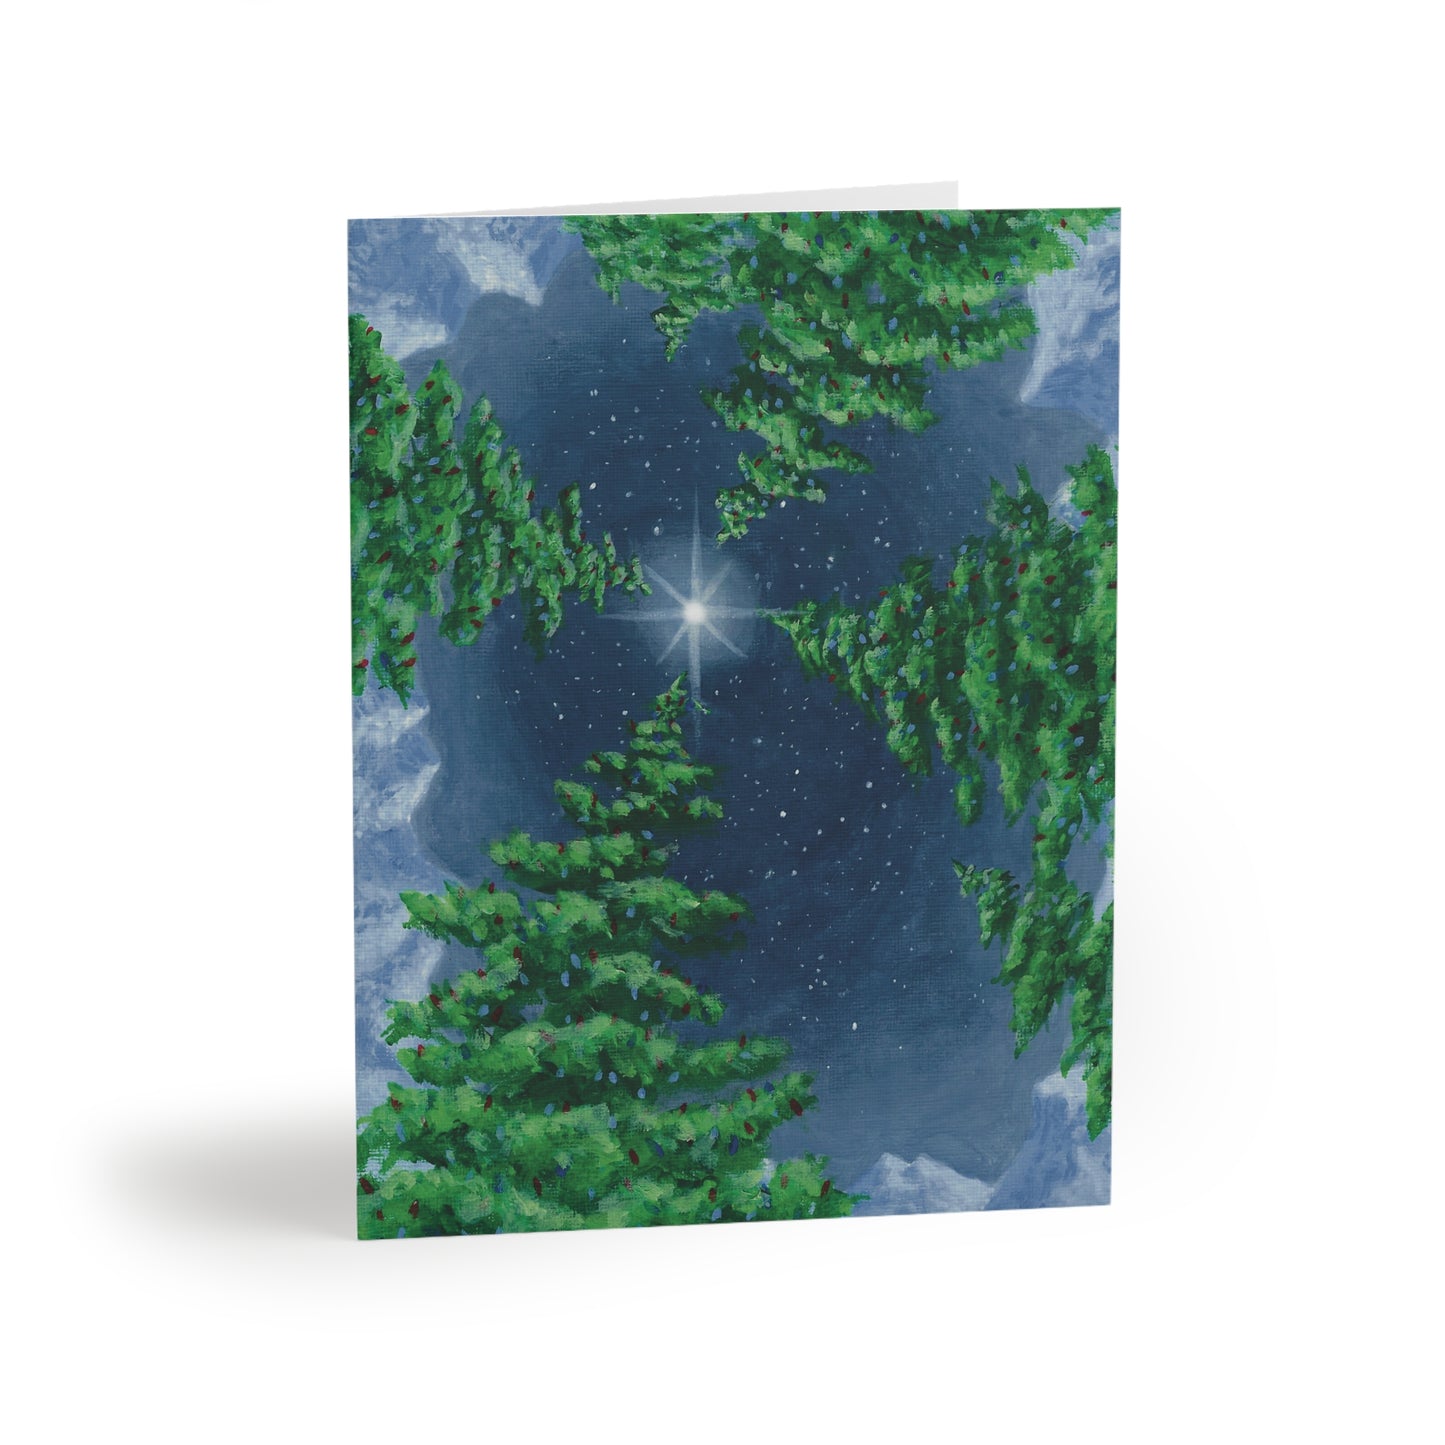 Greeting cards - North Star (8, 16, and 24 pcs)